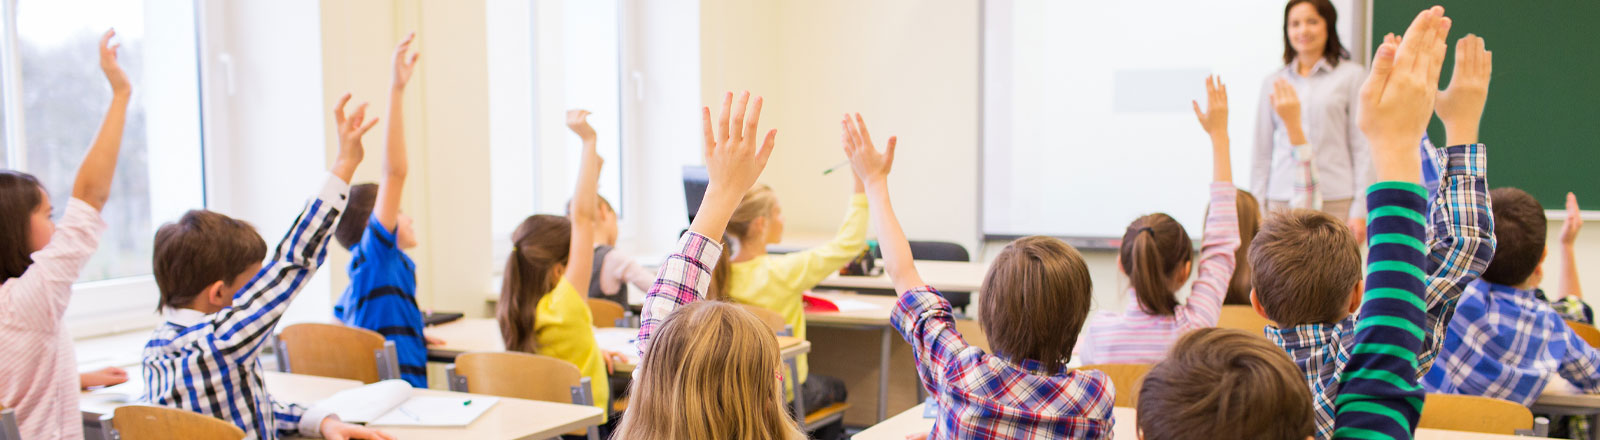 Elementary students raising hand in front of teacher